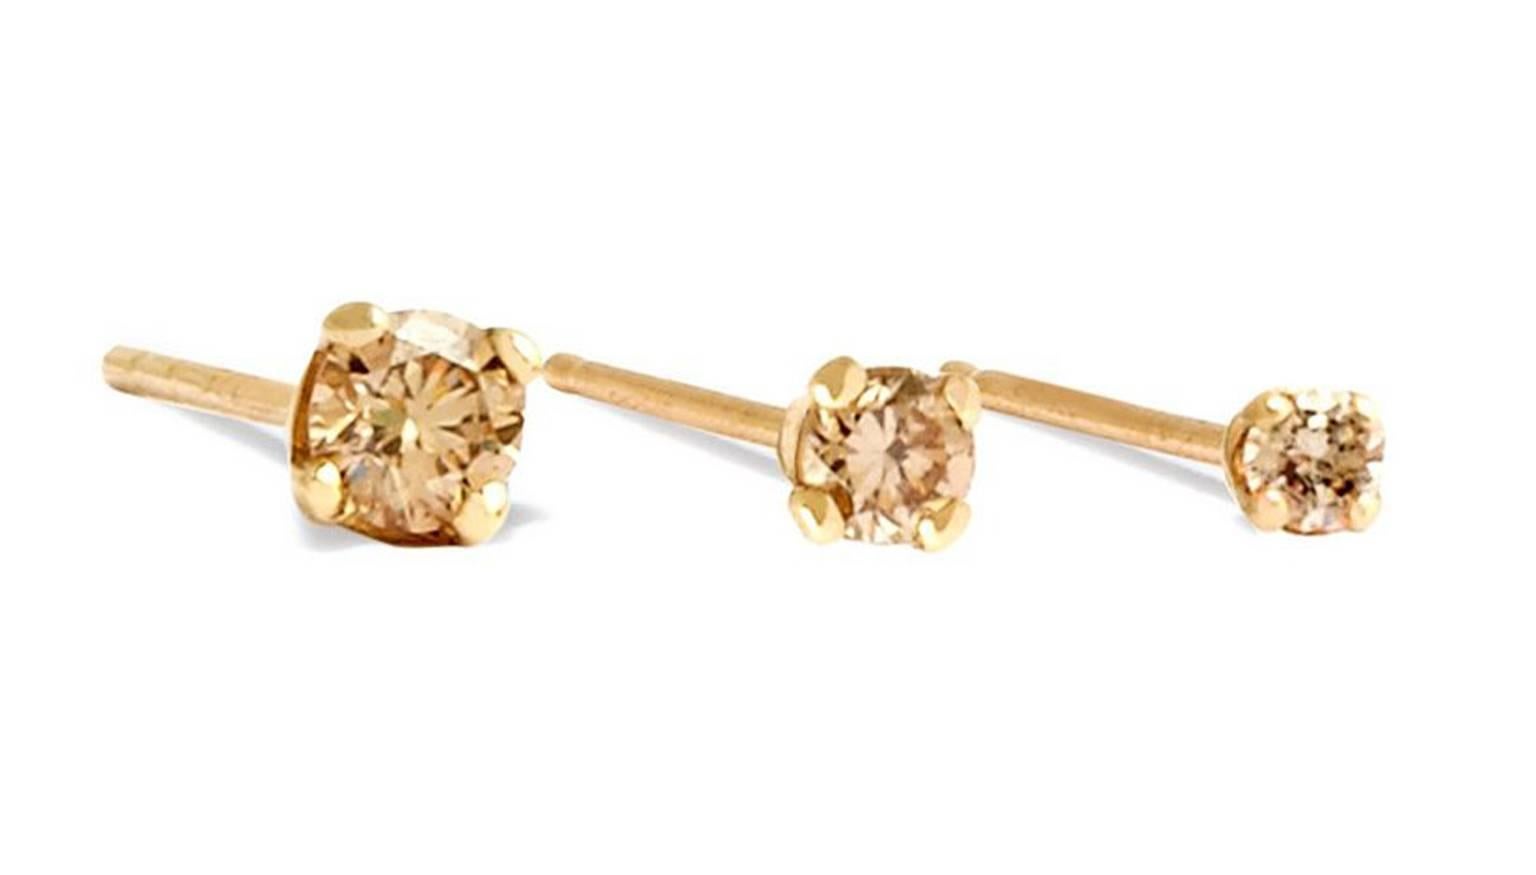 Sparkling champagne diamond stud earring set in 9-carat yellow gold.  Sold individually, each stud features a 0.12 carat round brilliant cut champagne diamond.  Measuring approximately 3.2 mm in diameter, this is the largest size of our range of